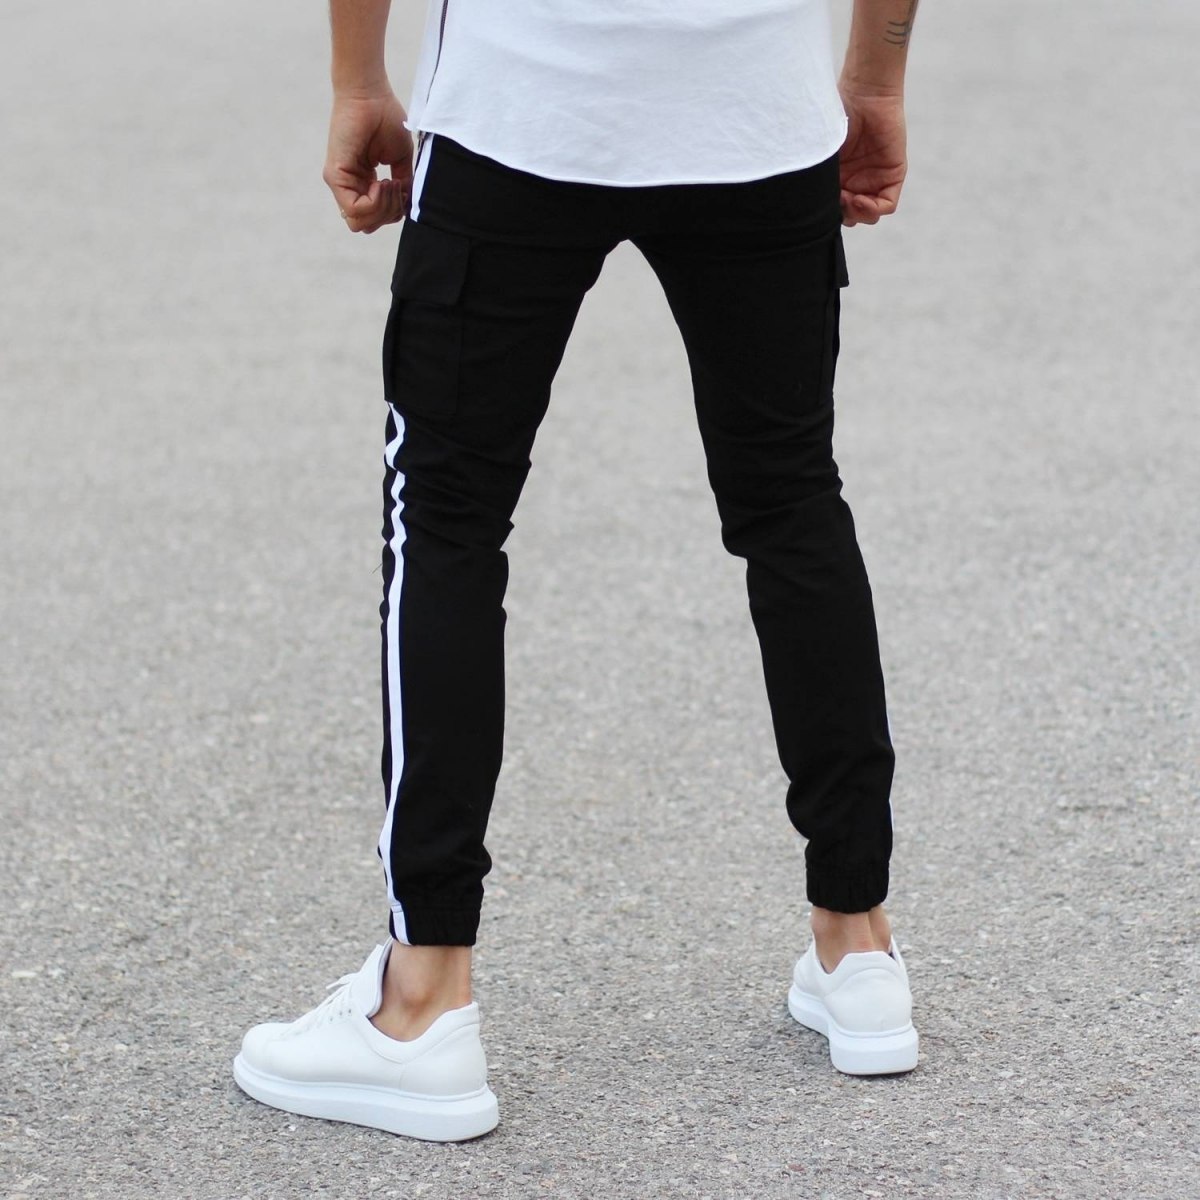 Black Pants With Large Pockets and Side-Stripes - 2